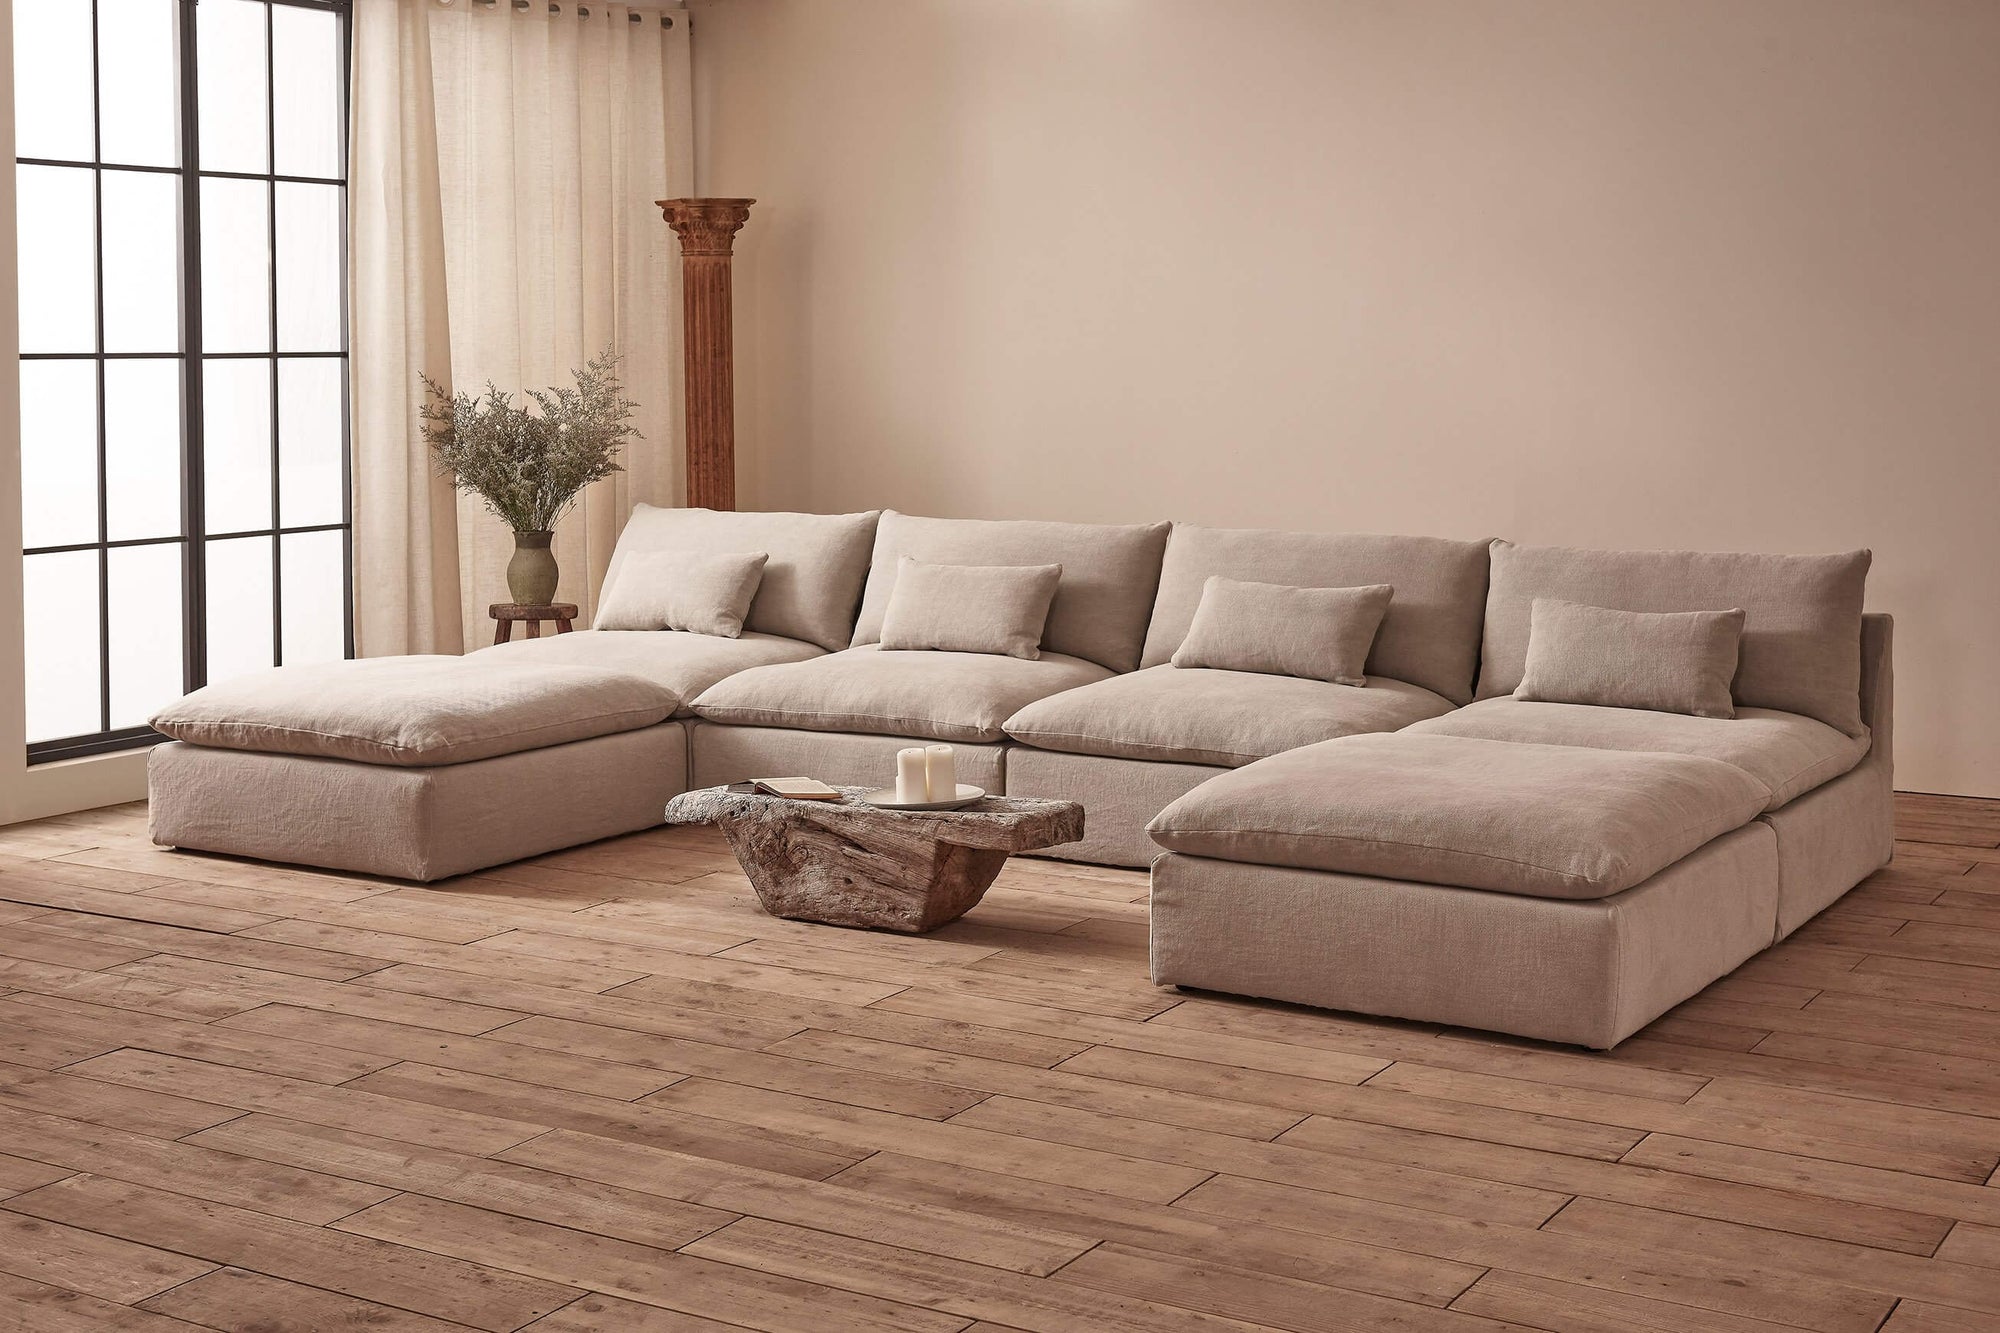 Aria U-Shape Sectional Sofa in Jasmine Rice, a light warm greige Medium Weight Linen, placed in a room with a small stone coffee table and a vase of flowers